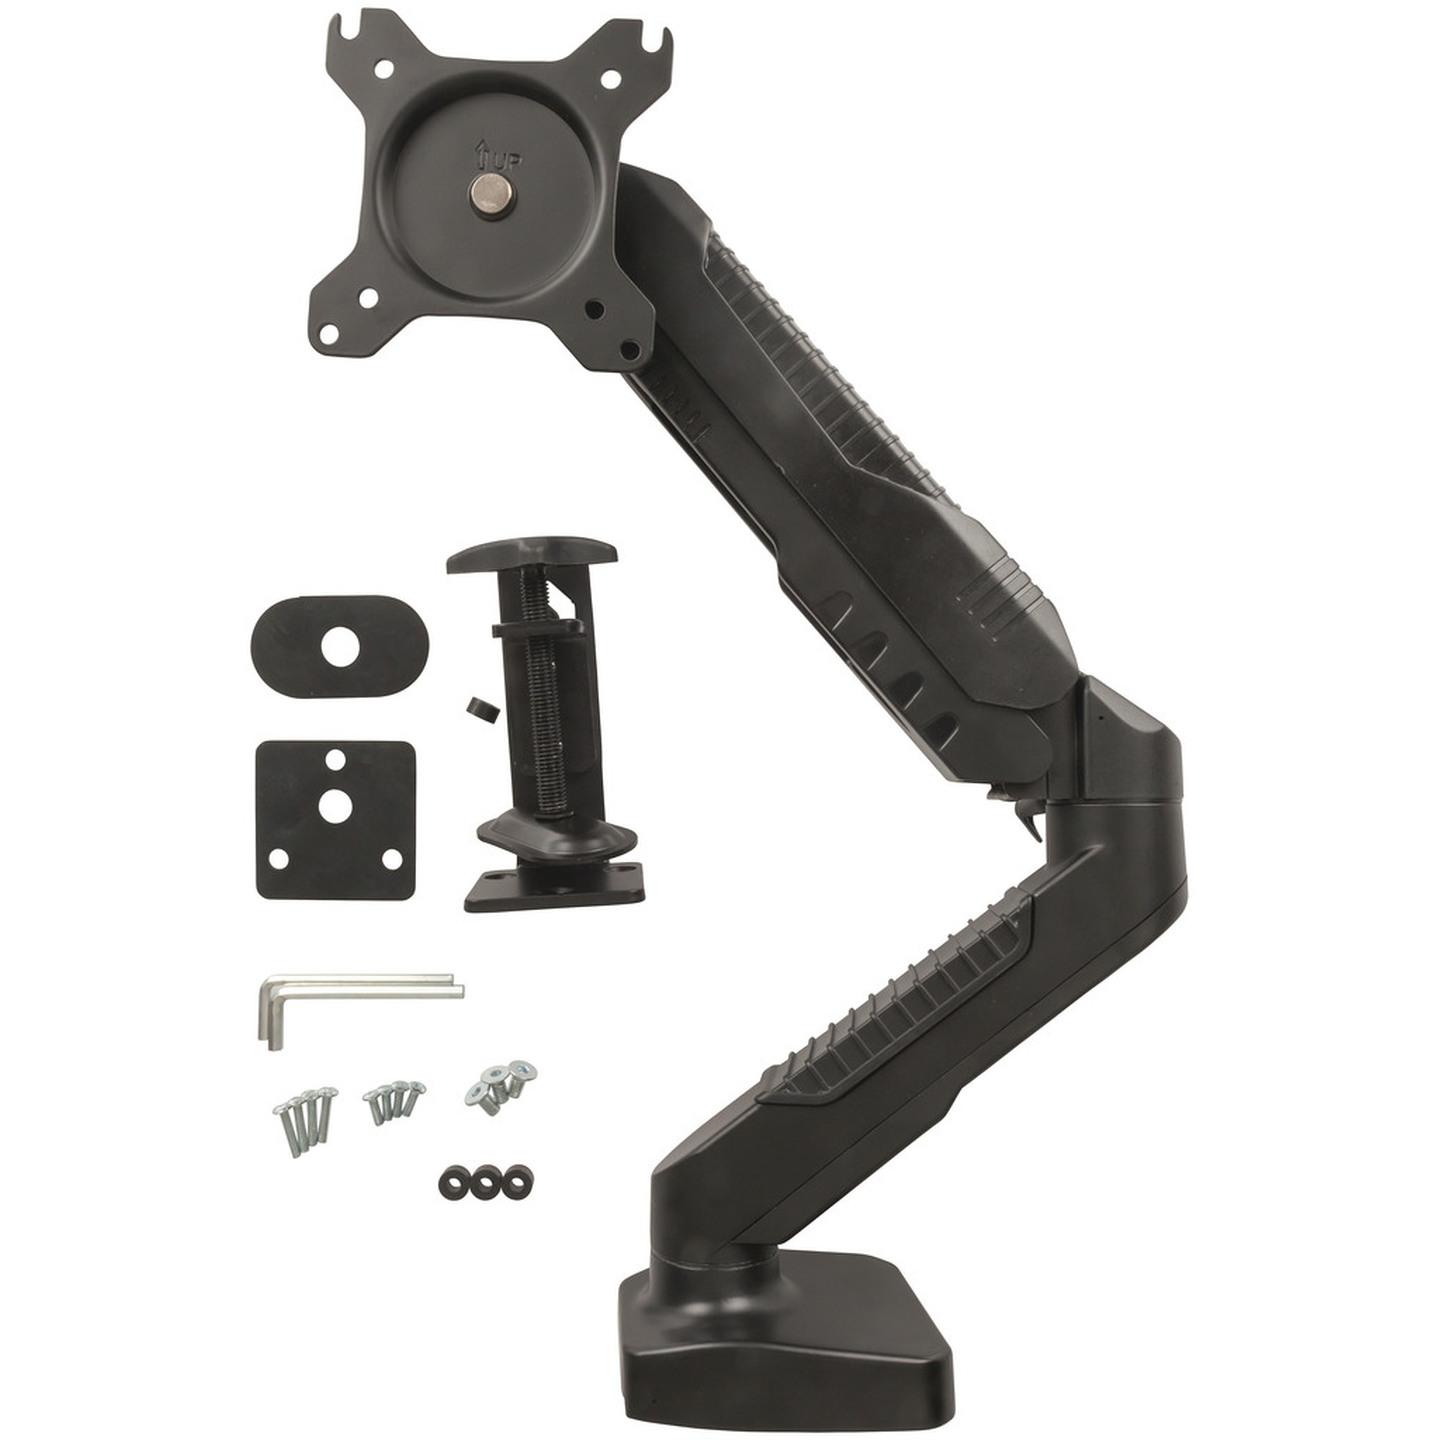 Articulating LCD Monitor Desk Mount